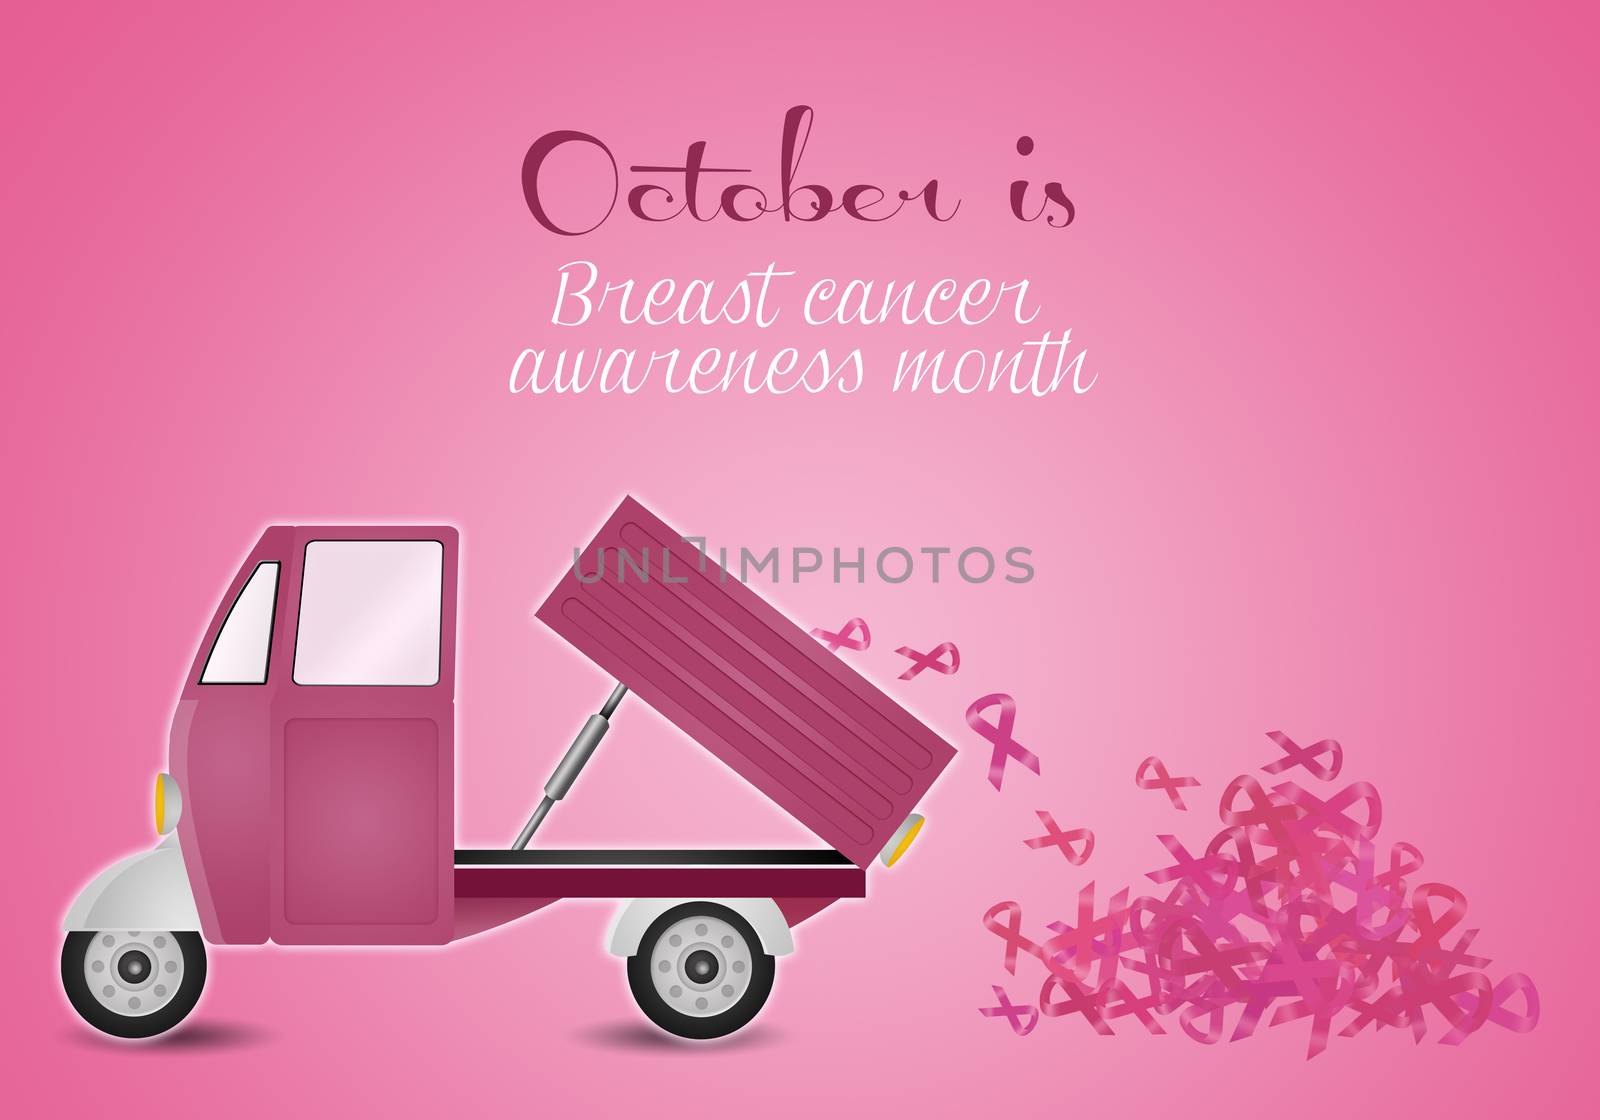 illustration of Pink van with pink ribbons